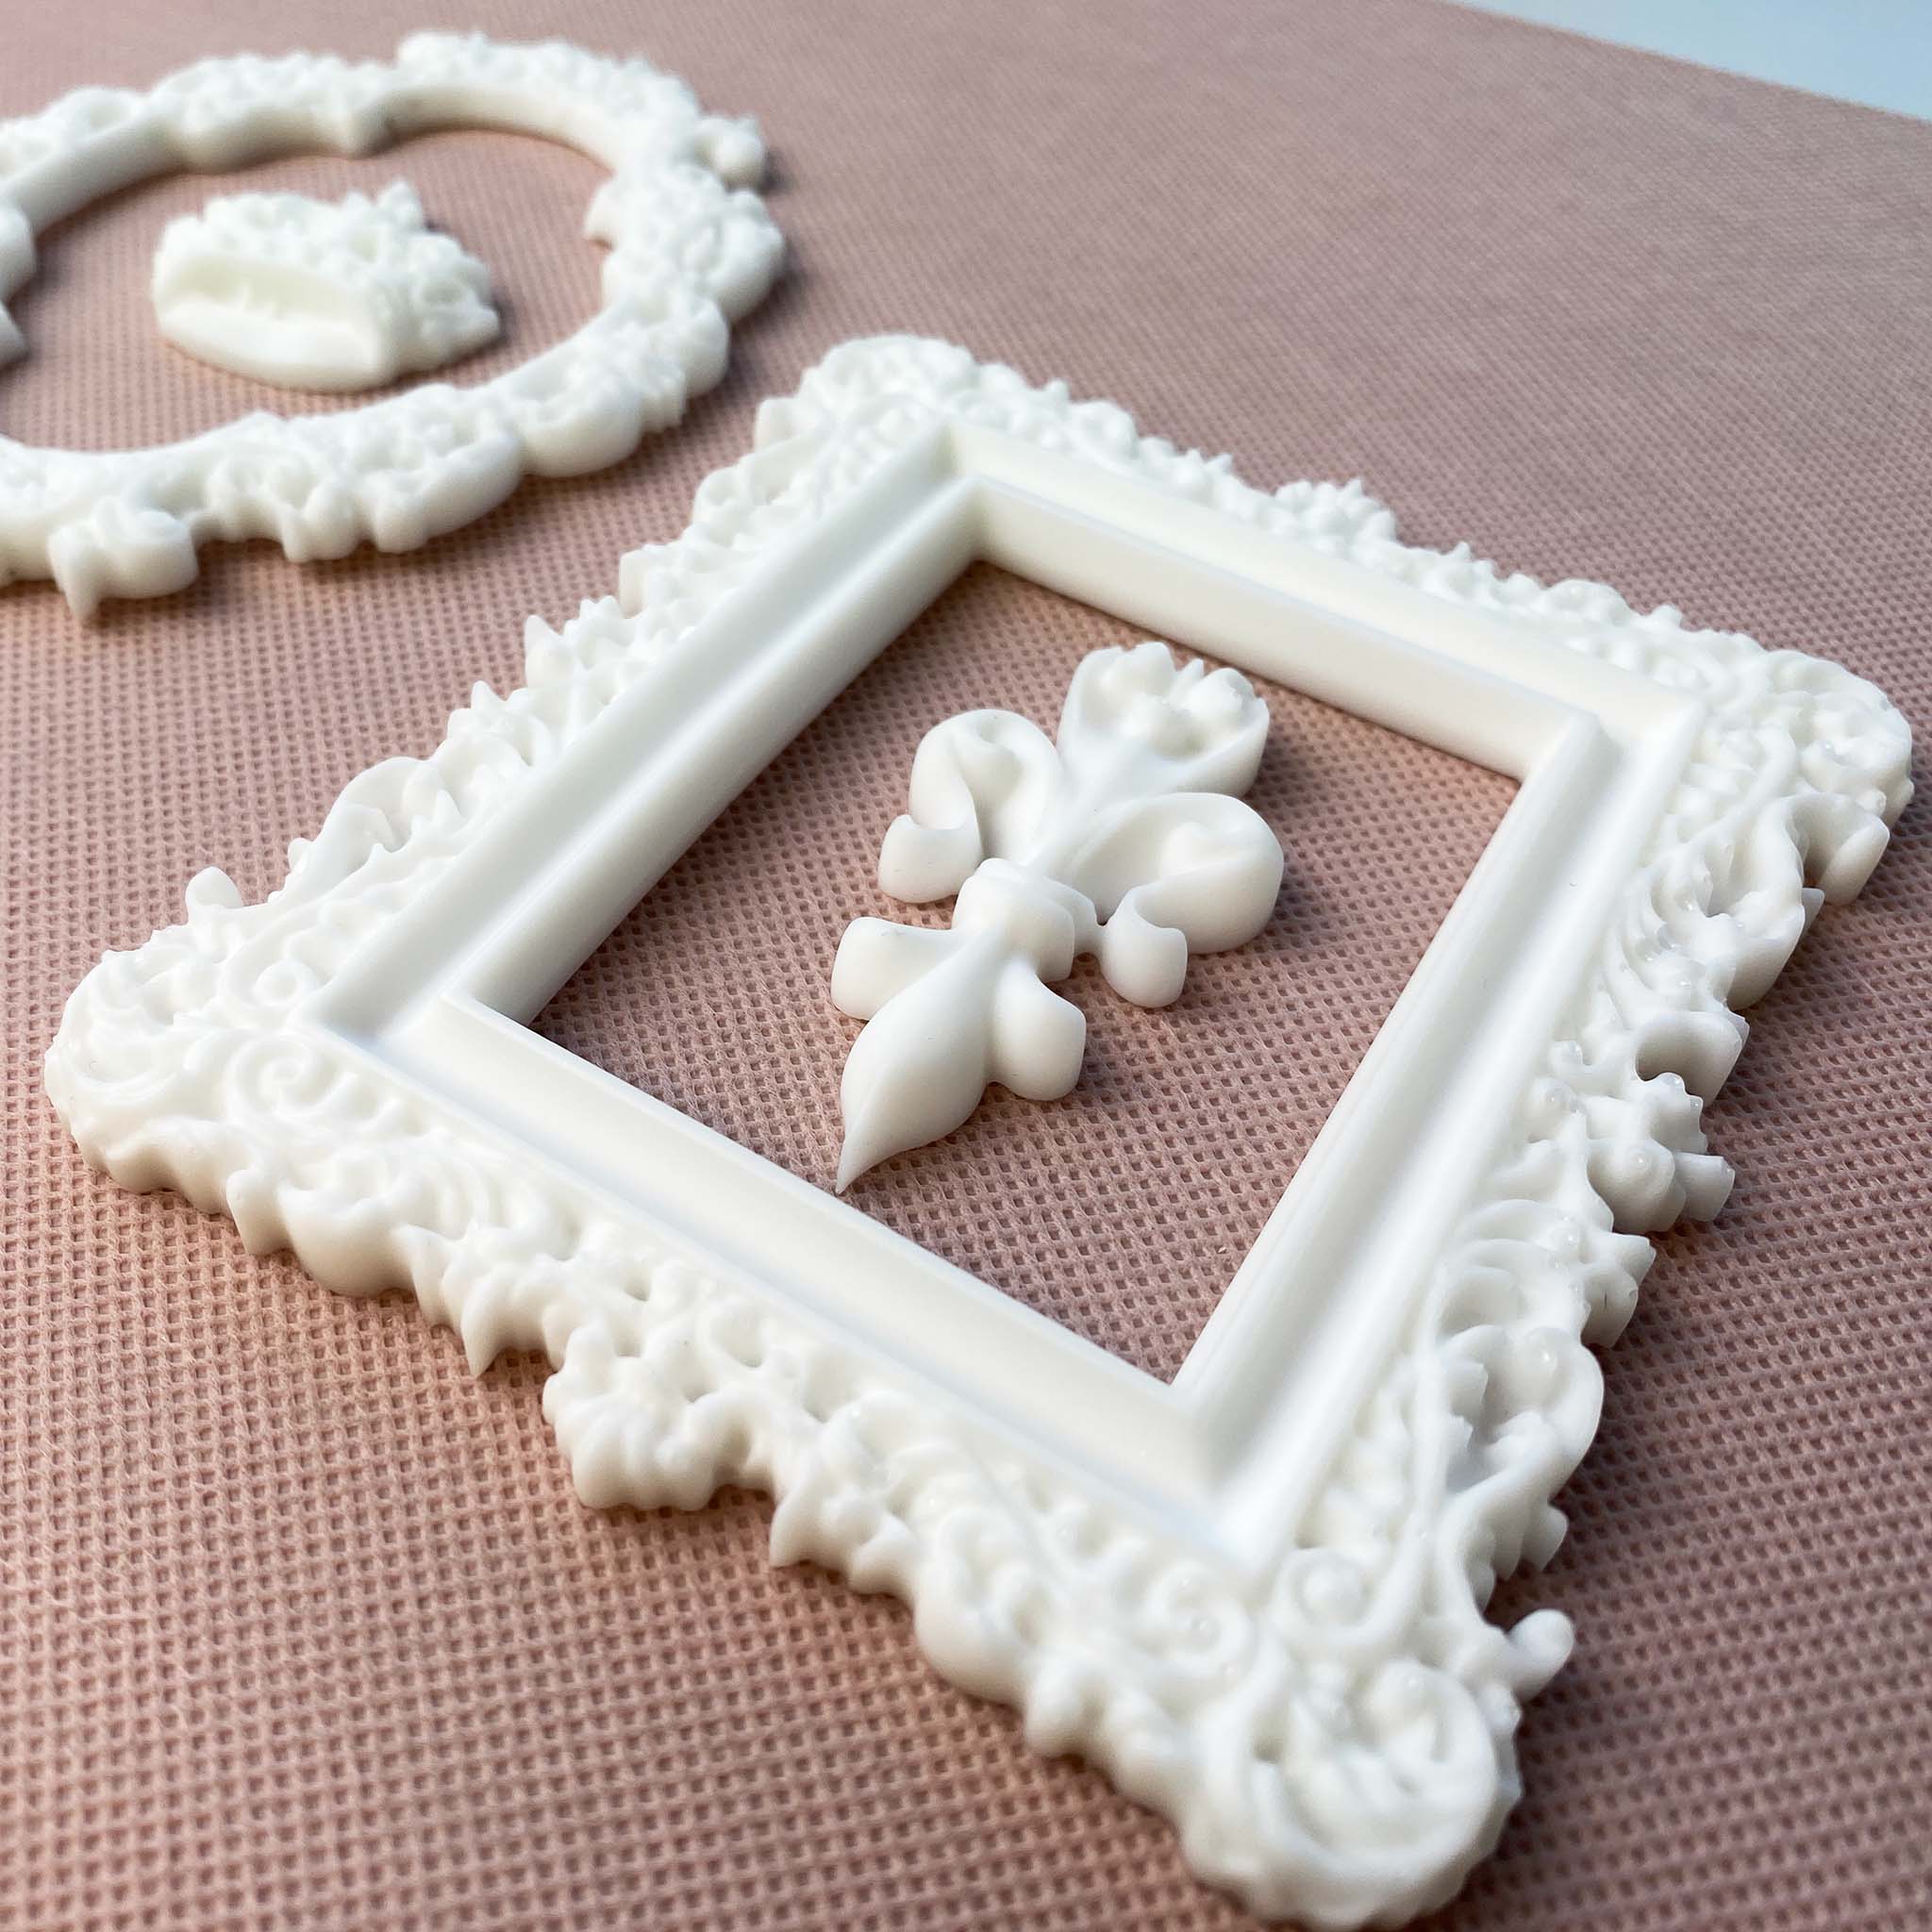 An angled view to show the thickness of white resin castings of an ornate oval and rectangle frame are against a light beige material background. Inside the oval frame is a casting of a royal crown and inside the rectangle frame is a fleur de lis.